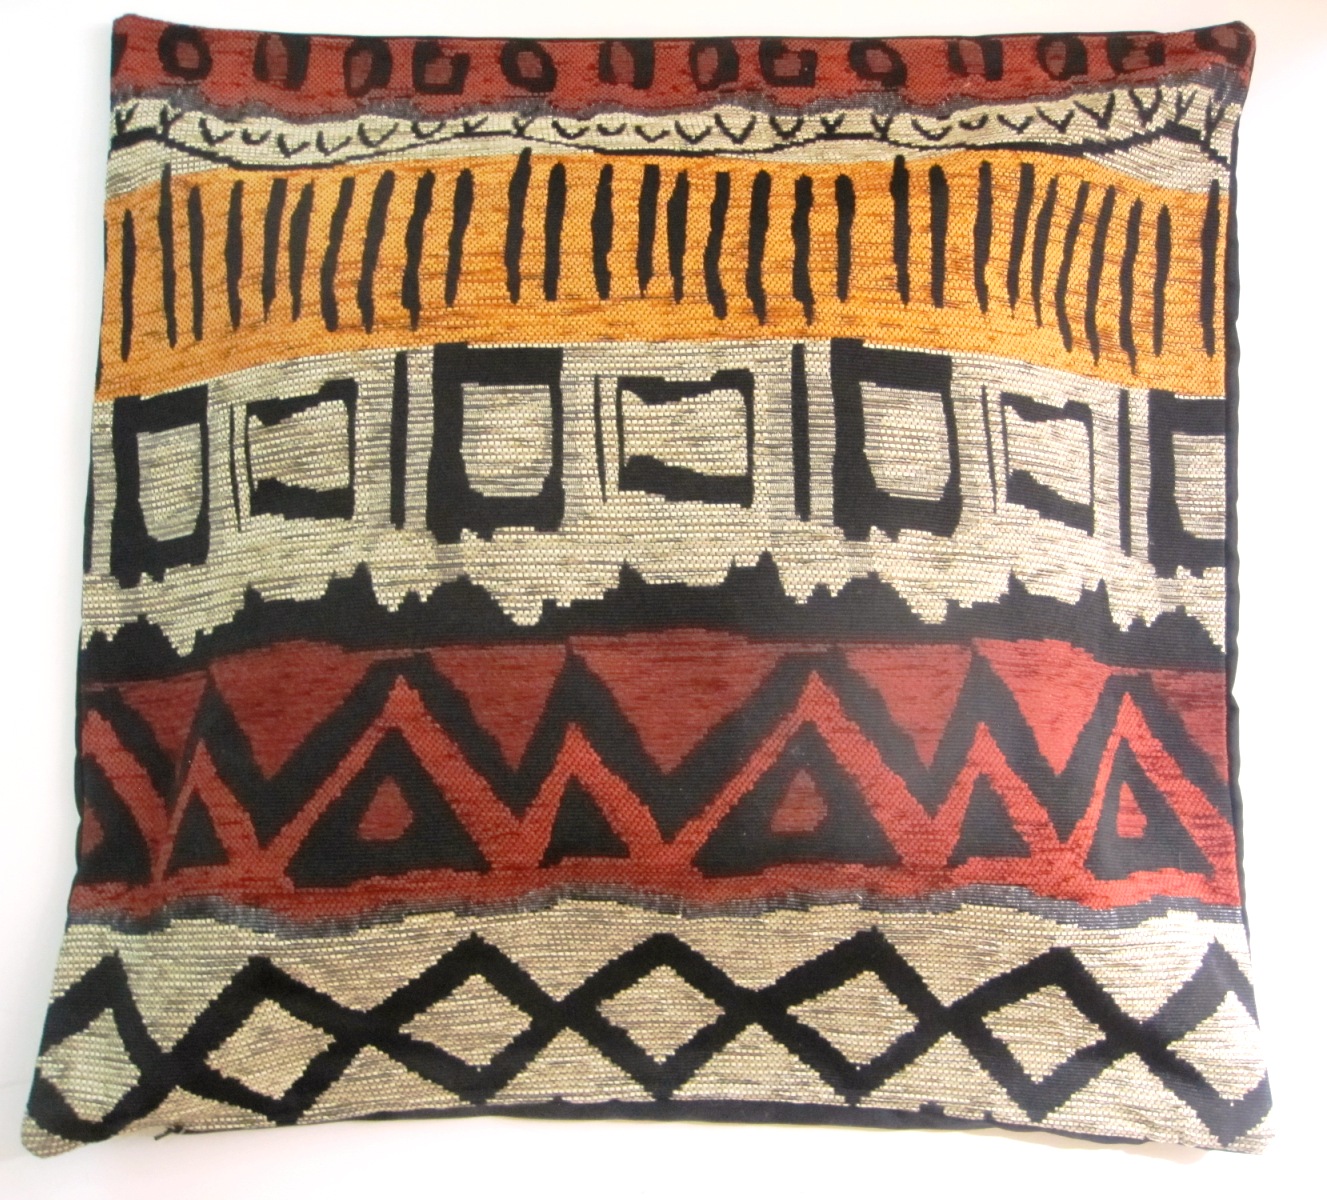 Hluhluwe Core Cushion Cover - 23 1/2\" x 23 1/2\"